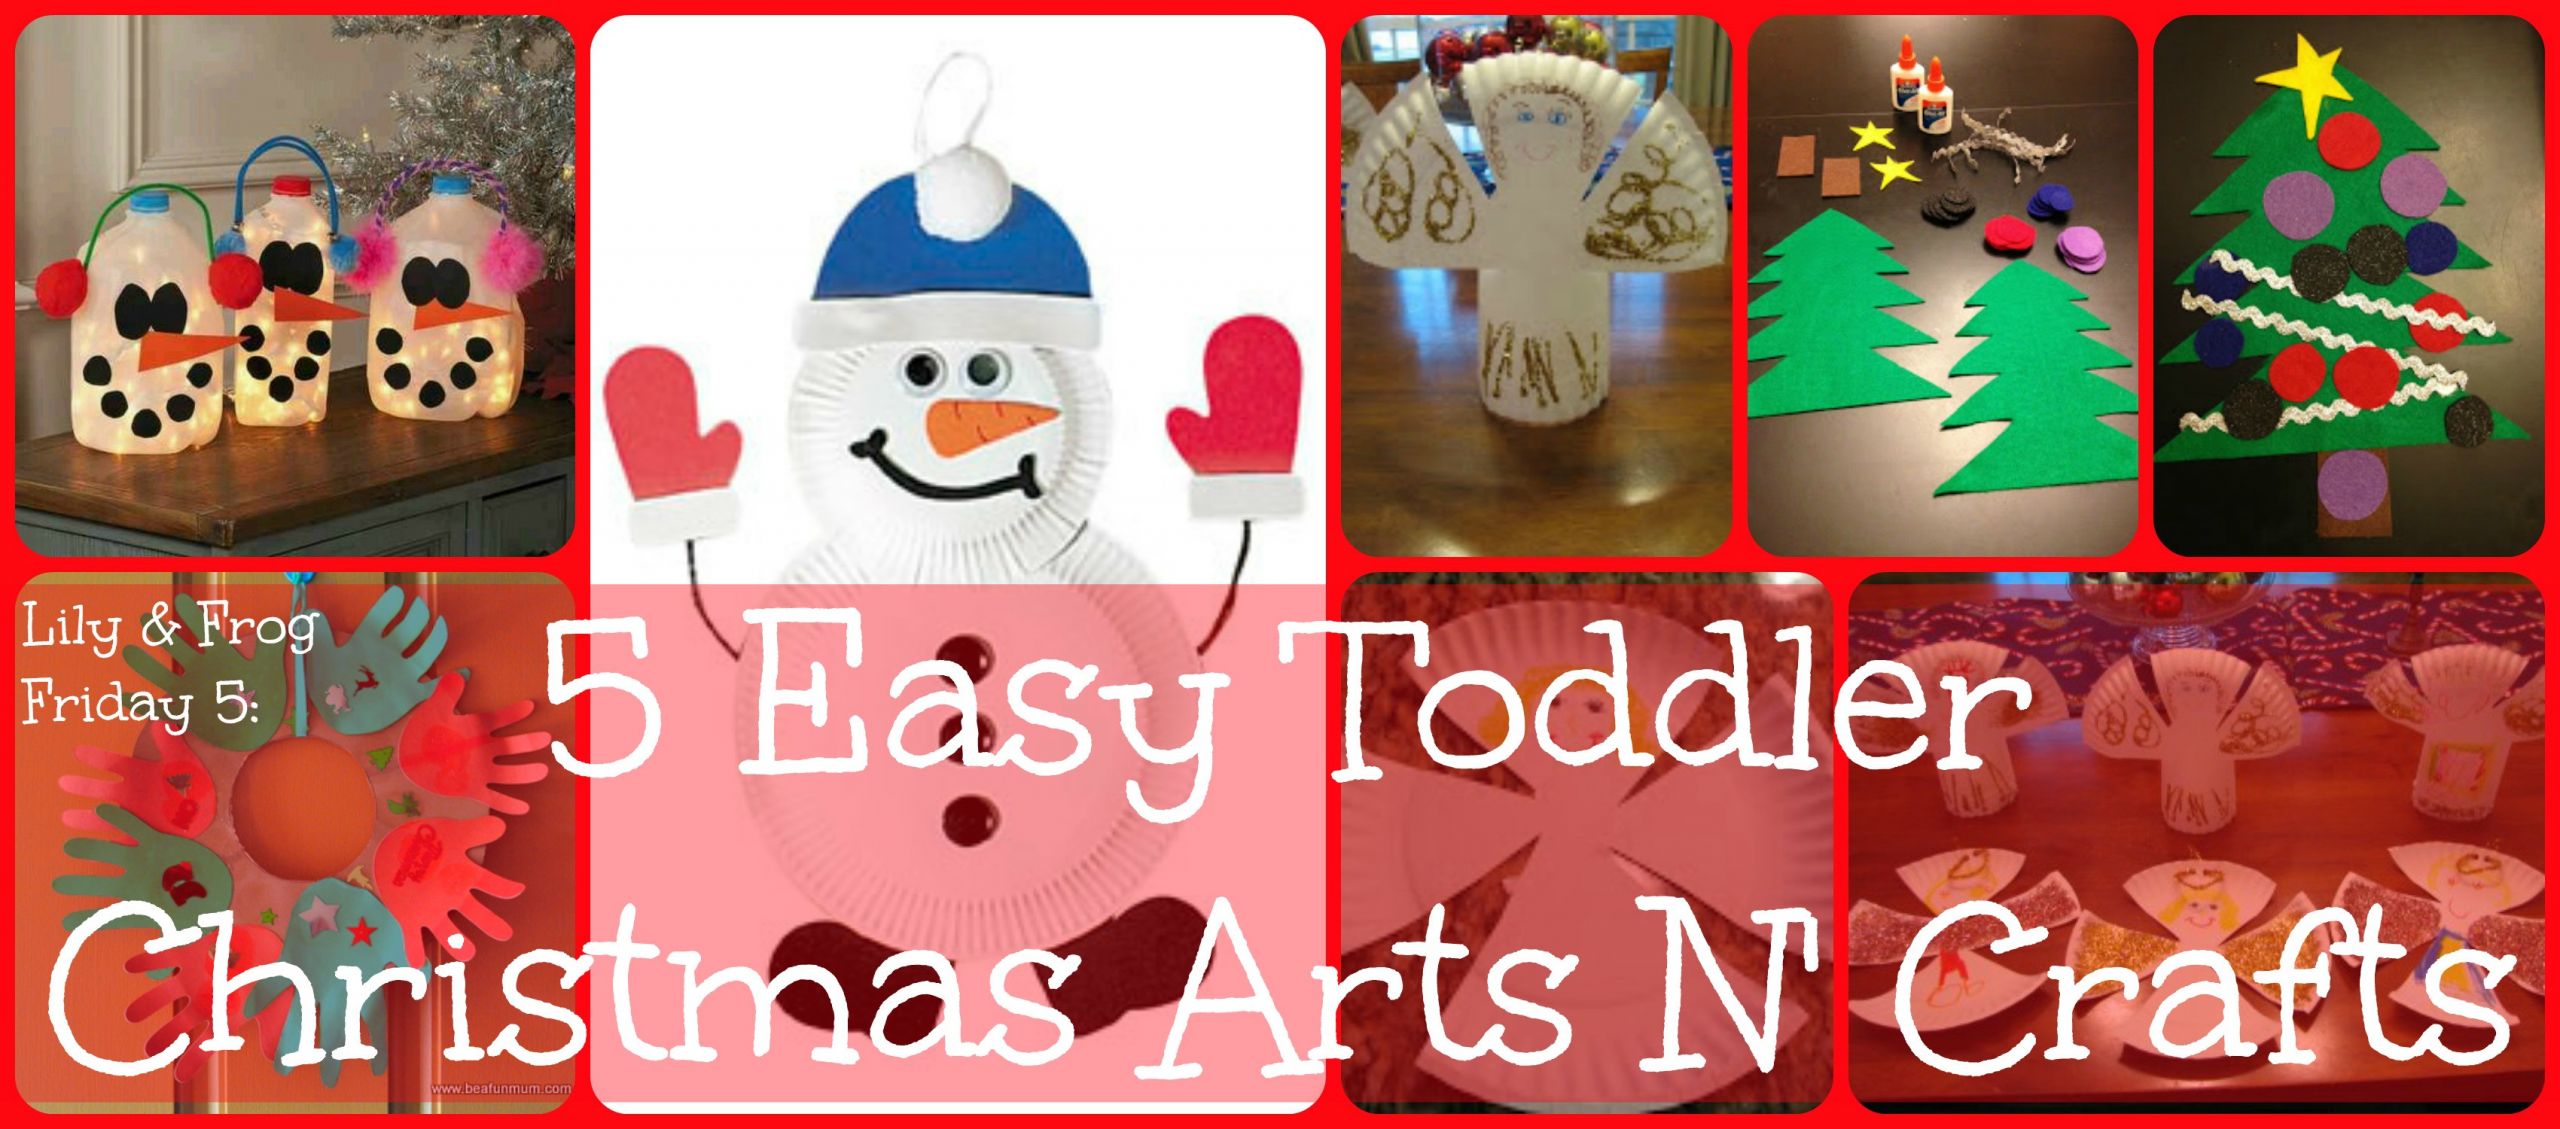 Arts N Crafts For Toddlers
 Lily & Frog Friday 5 5 Easy Toddler Christmas Arts N